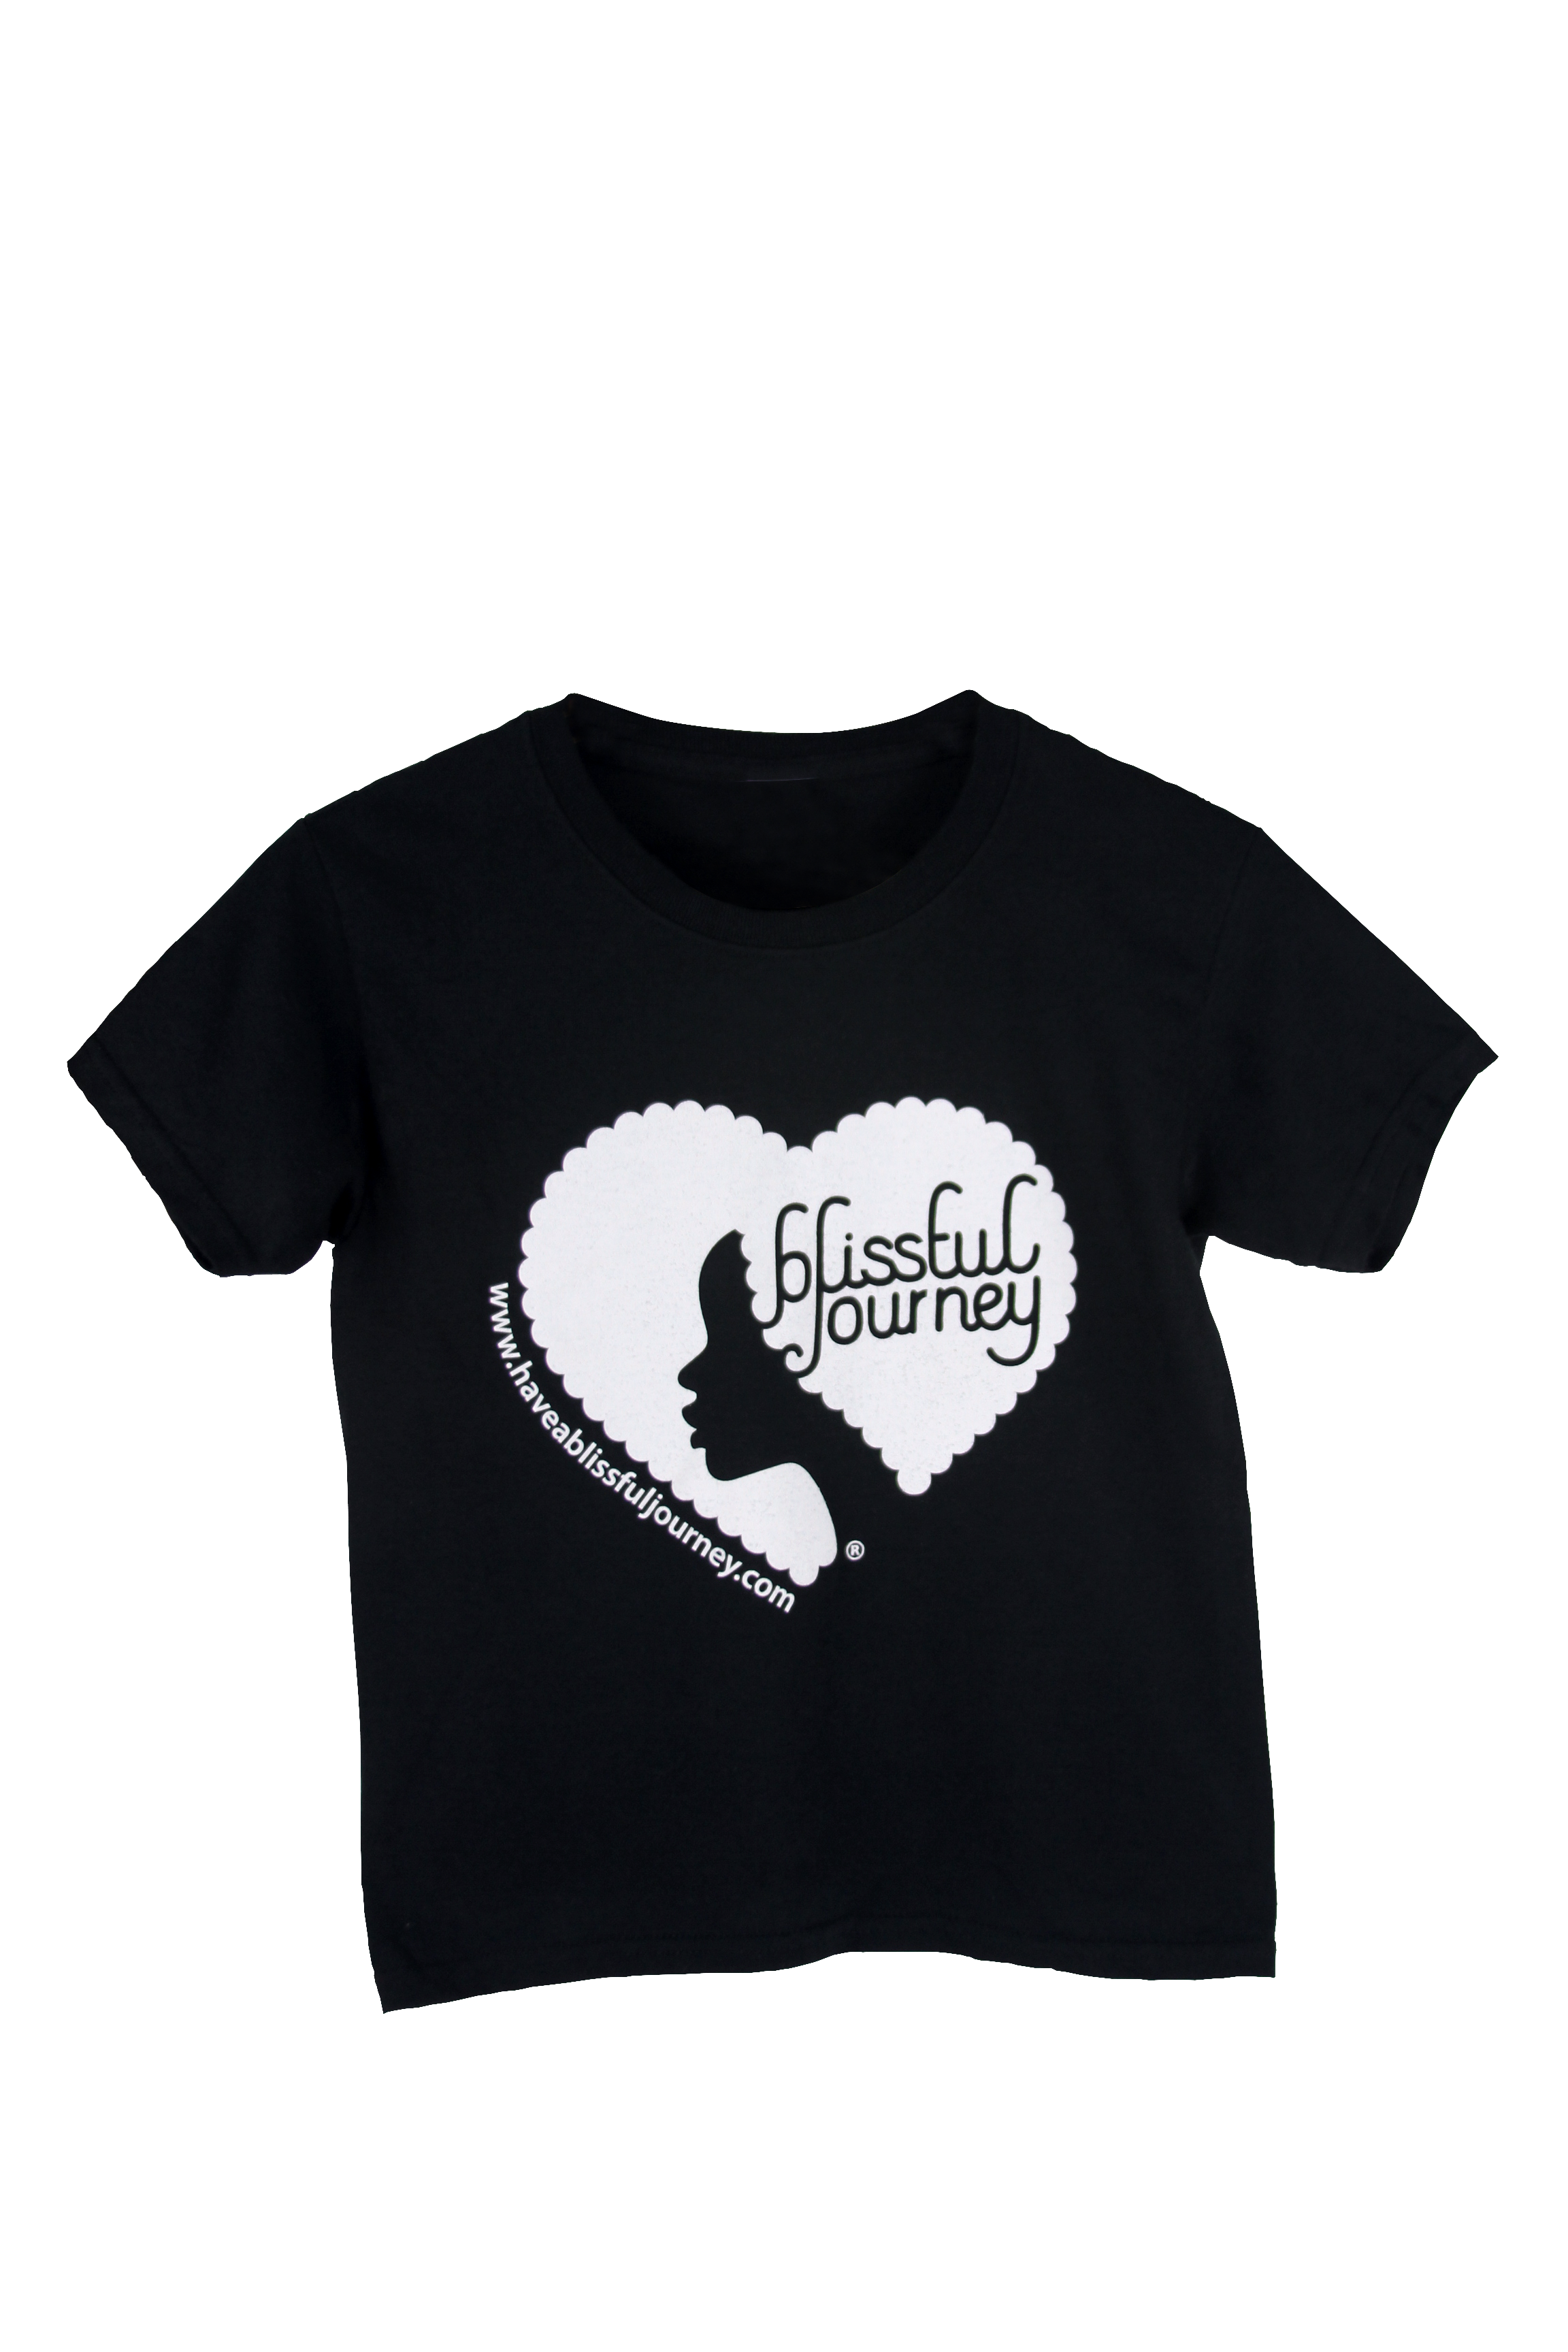 LIMITED EDITION: Blissful Journey T-Shirt